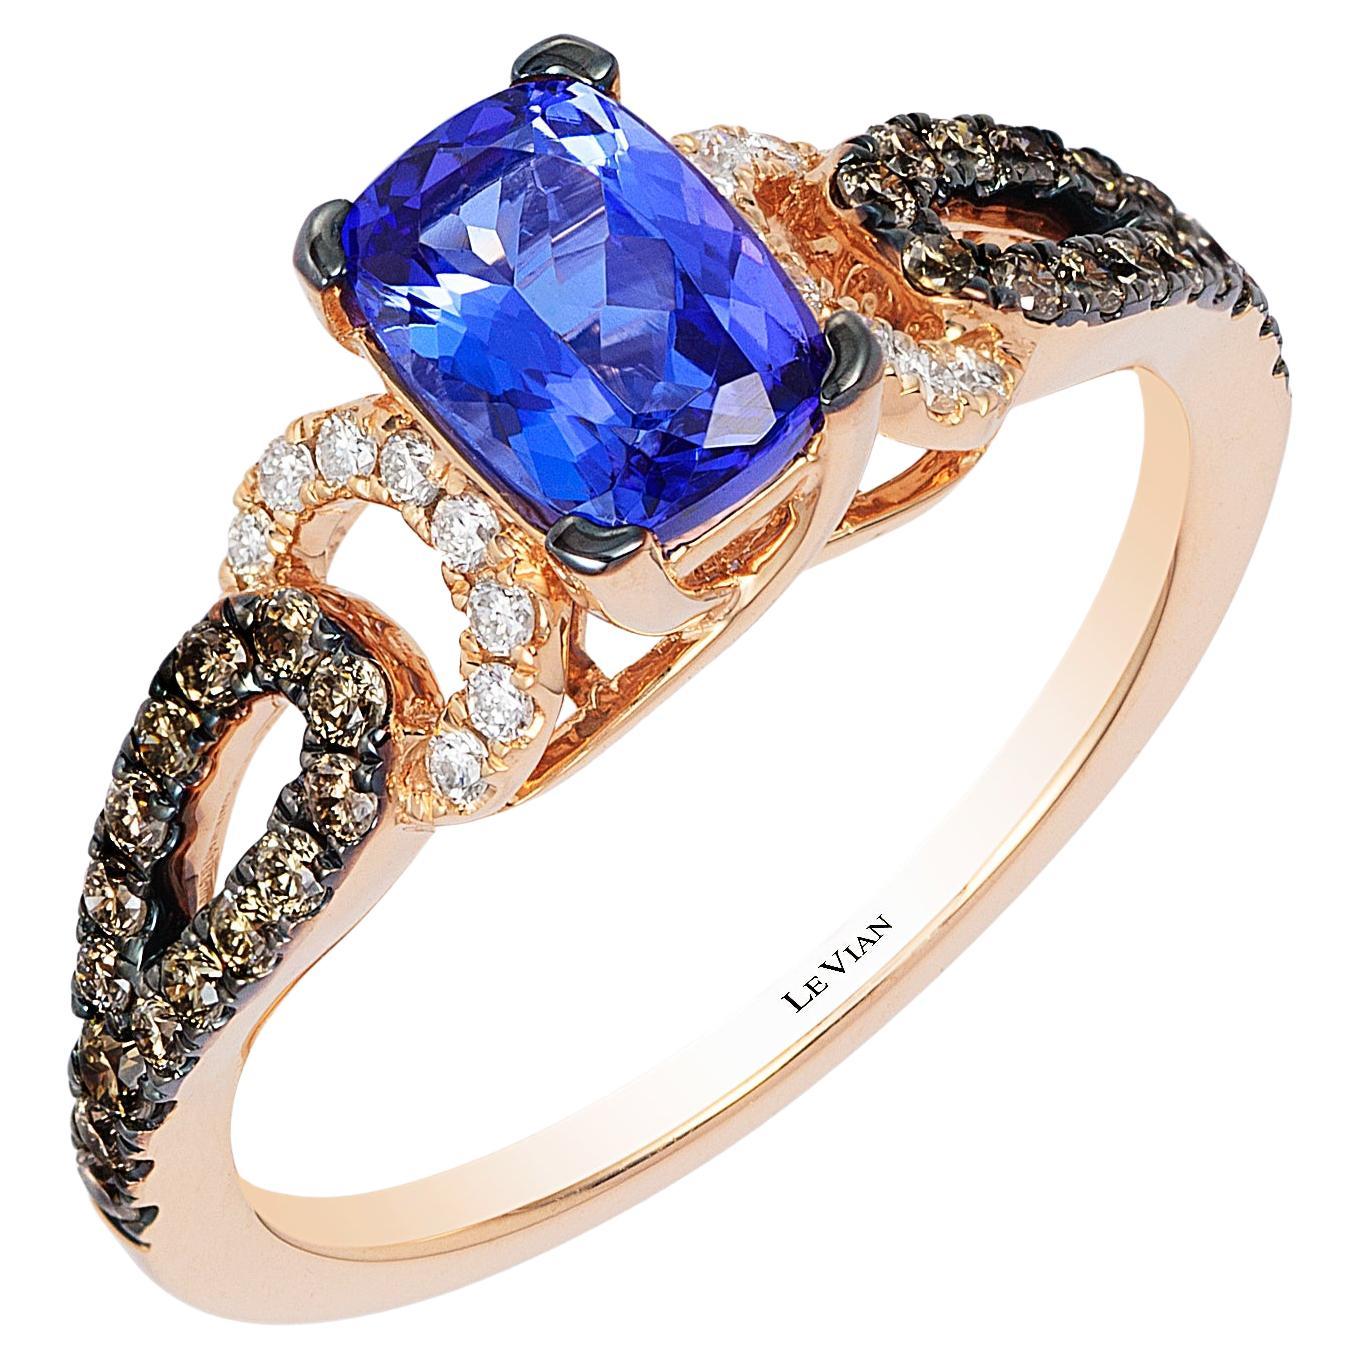 LeVian Blue Tanzanite and Diamond Ring in 14K Rose Gold Size 7 For Sale